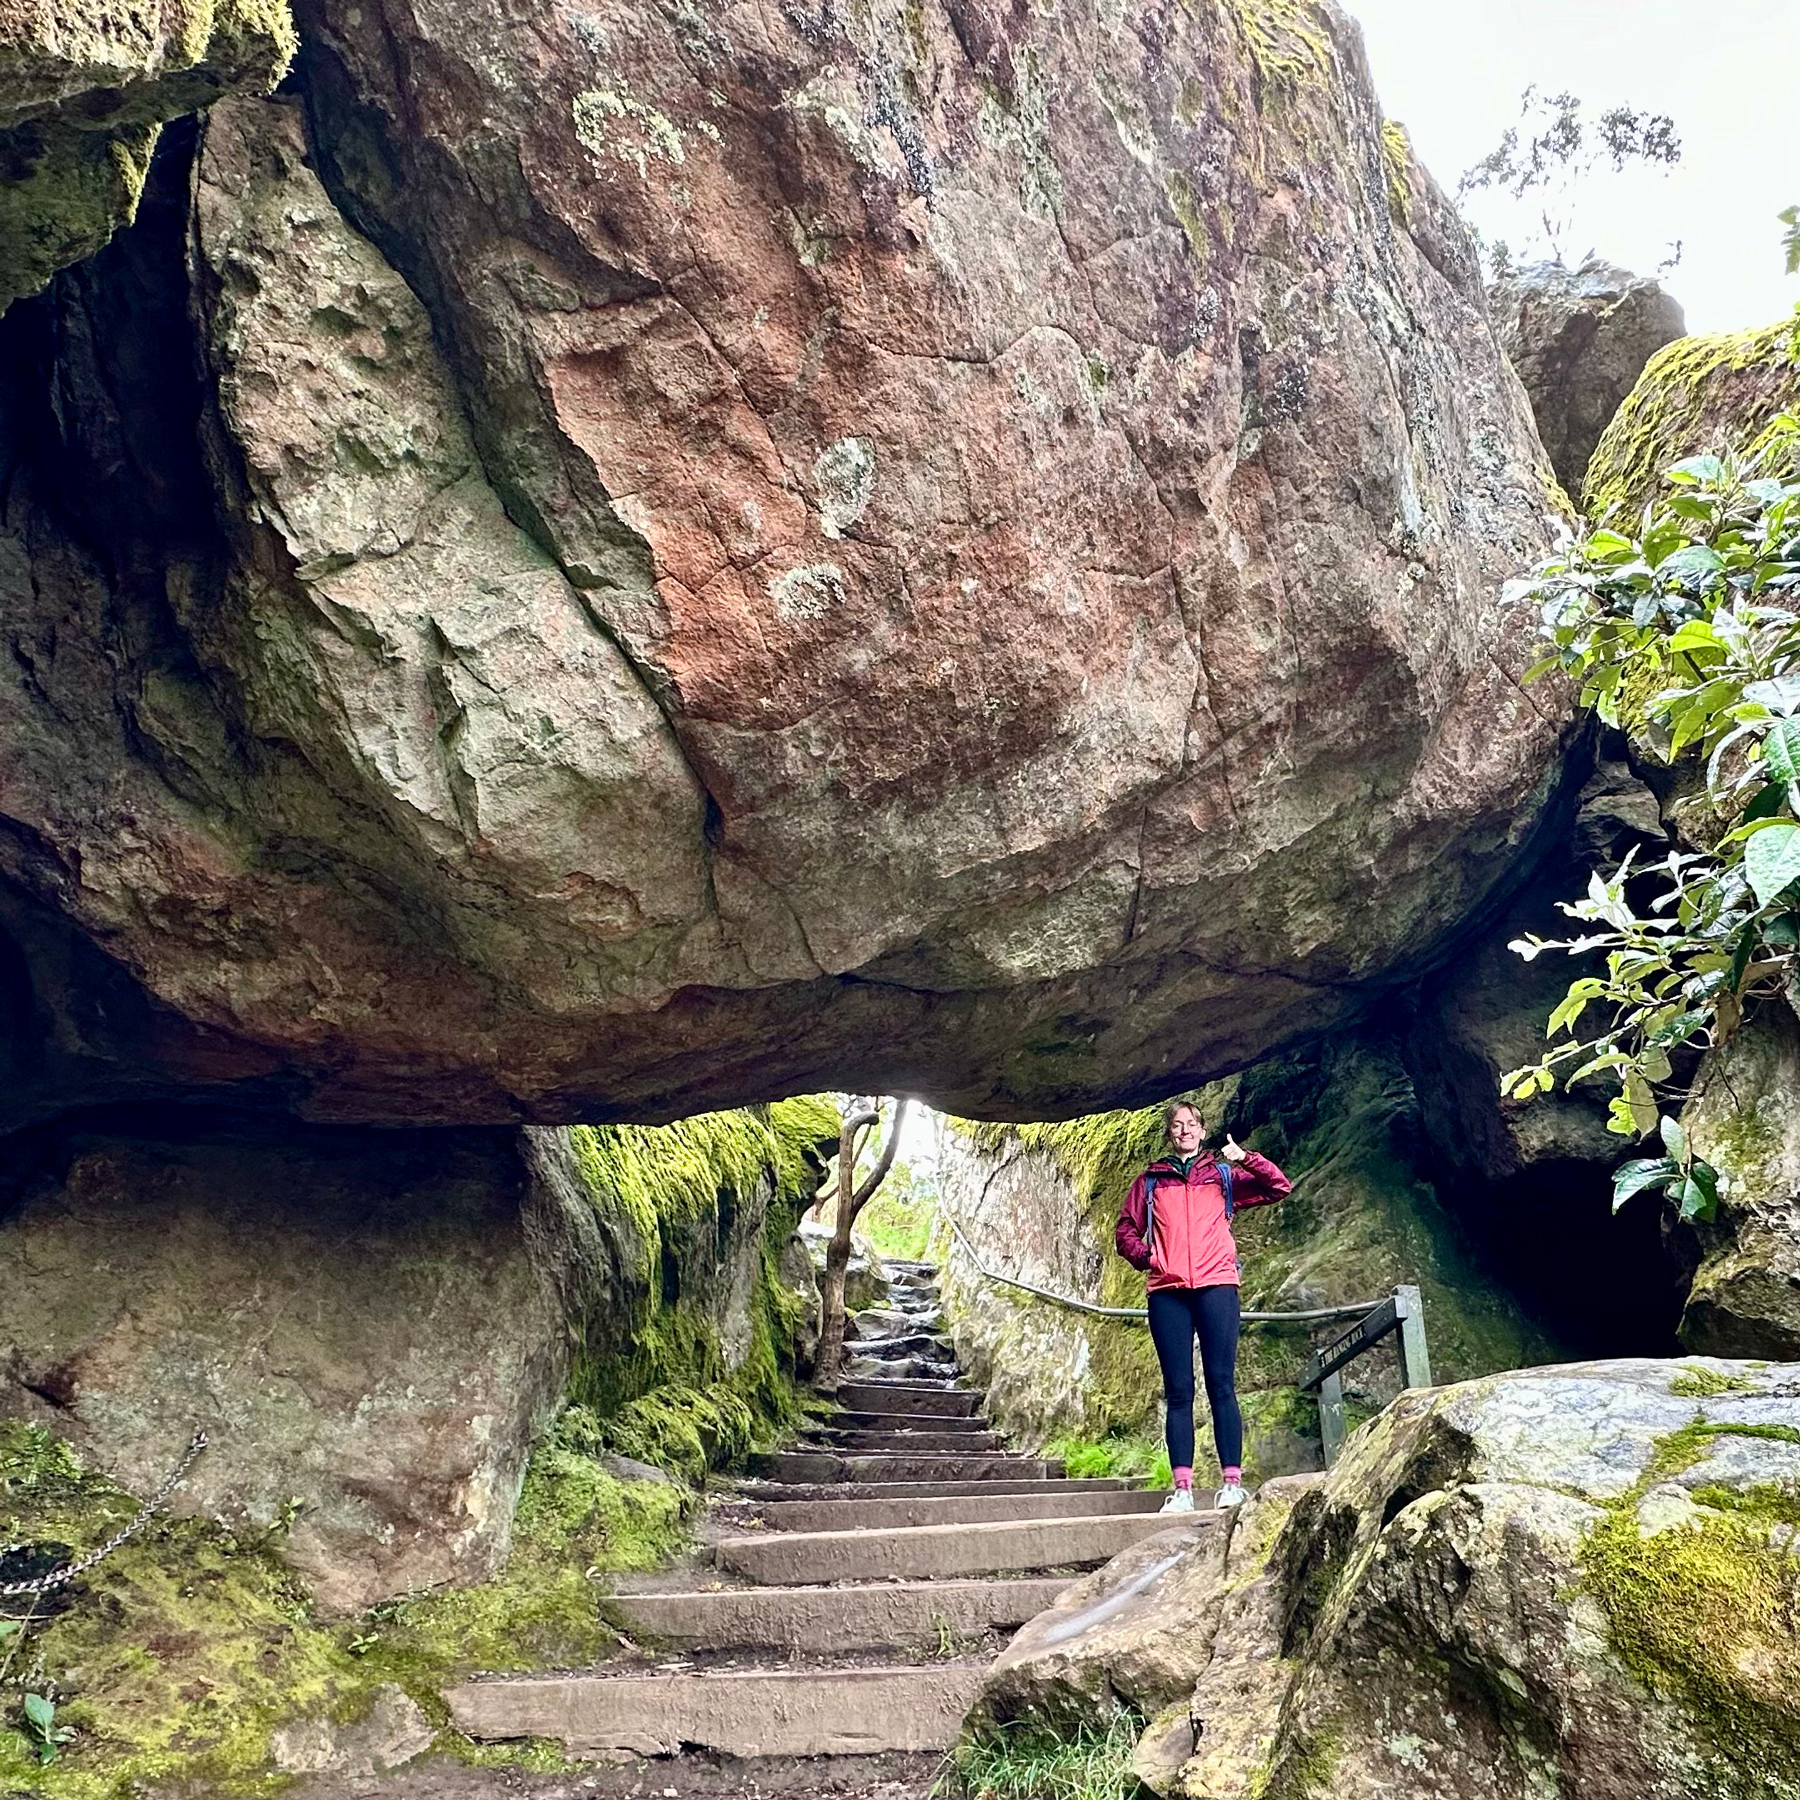 Charlotte standing beneath a large suspended rock